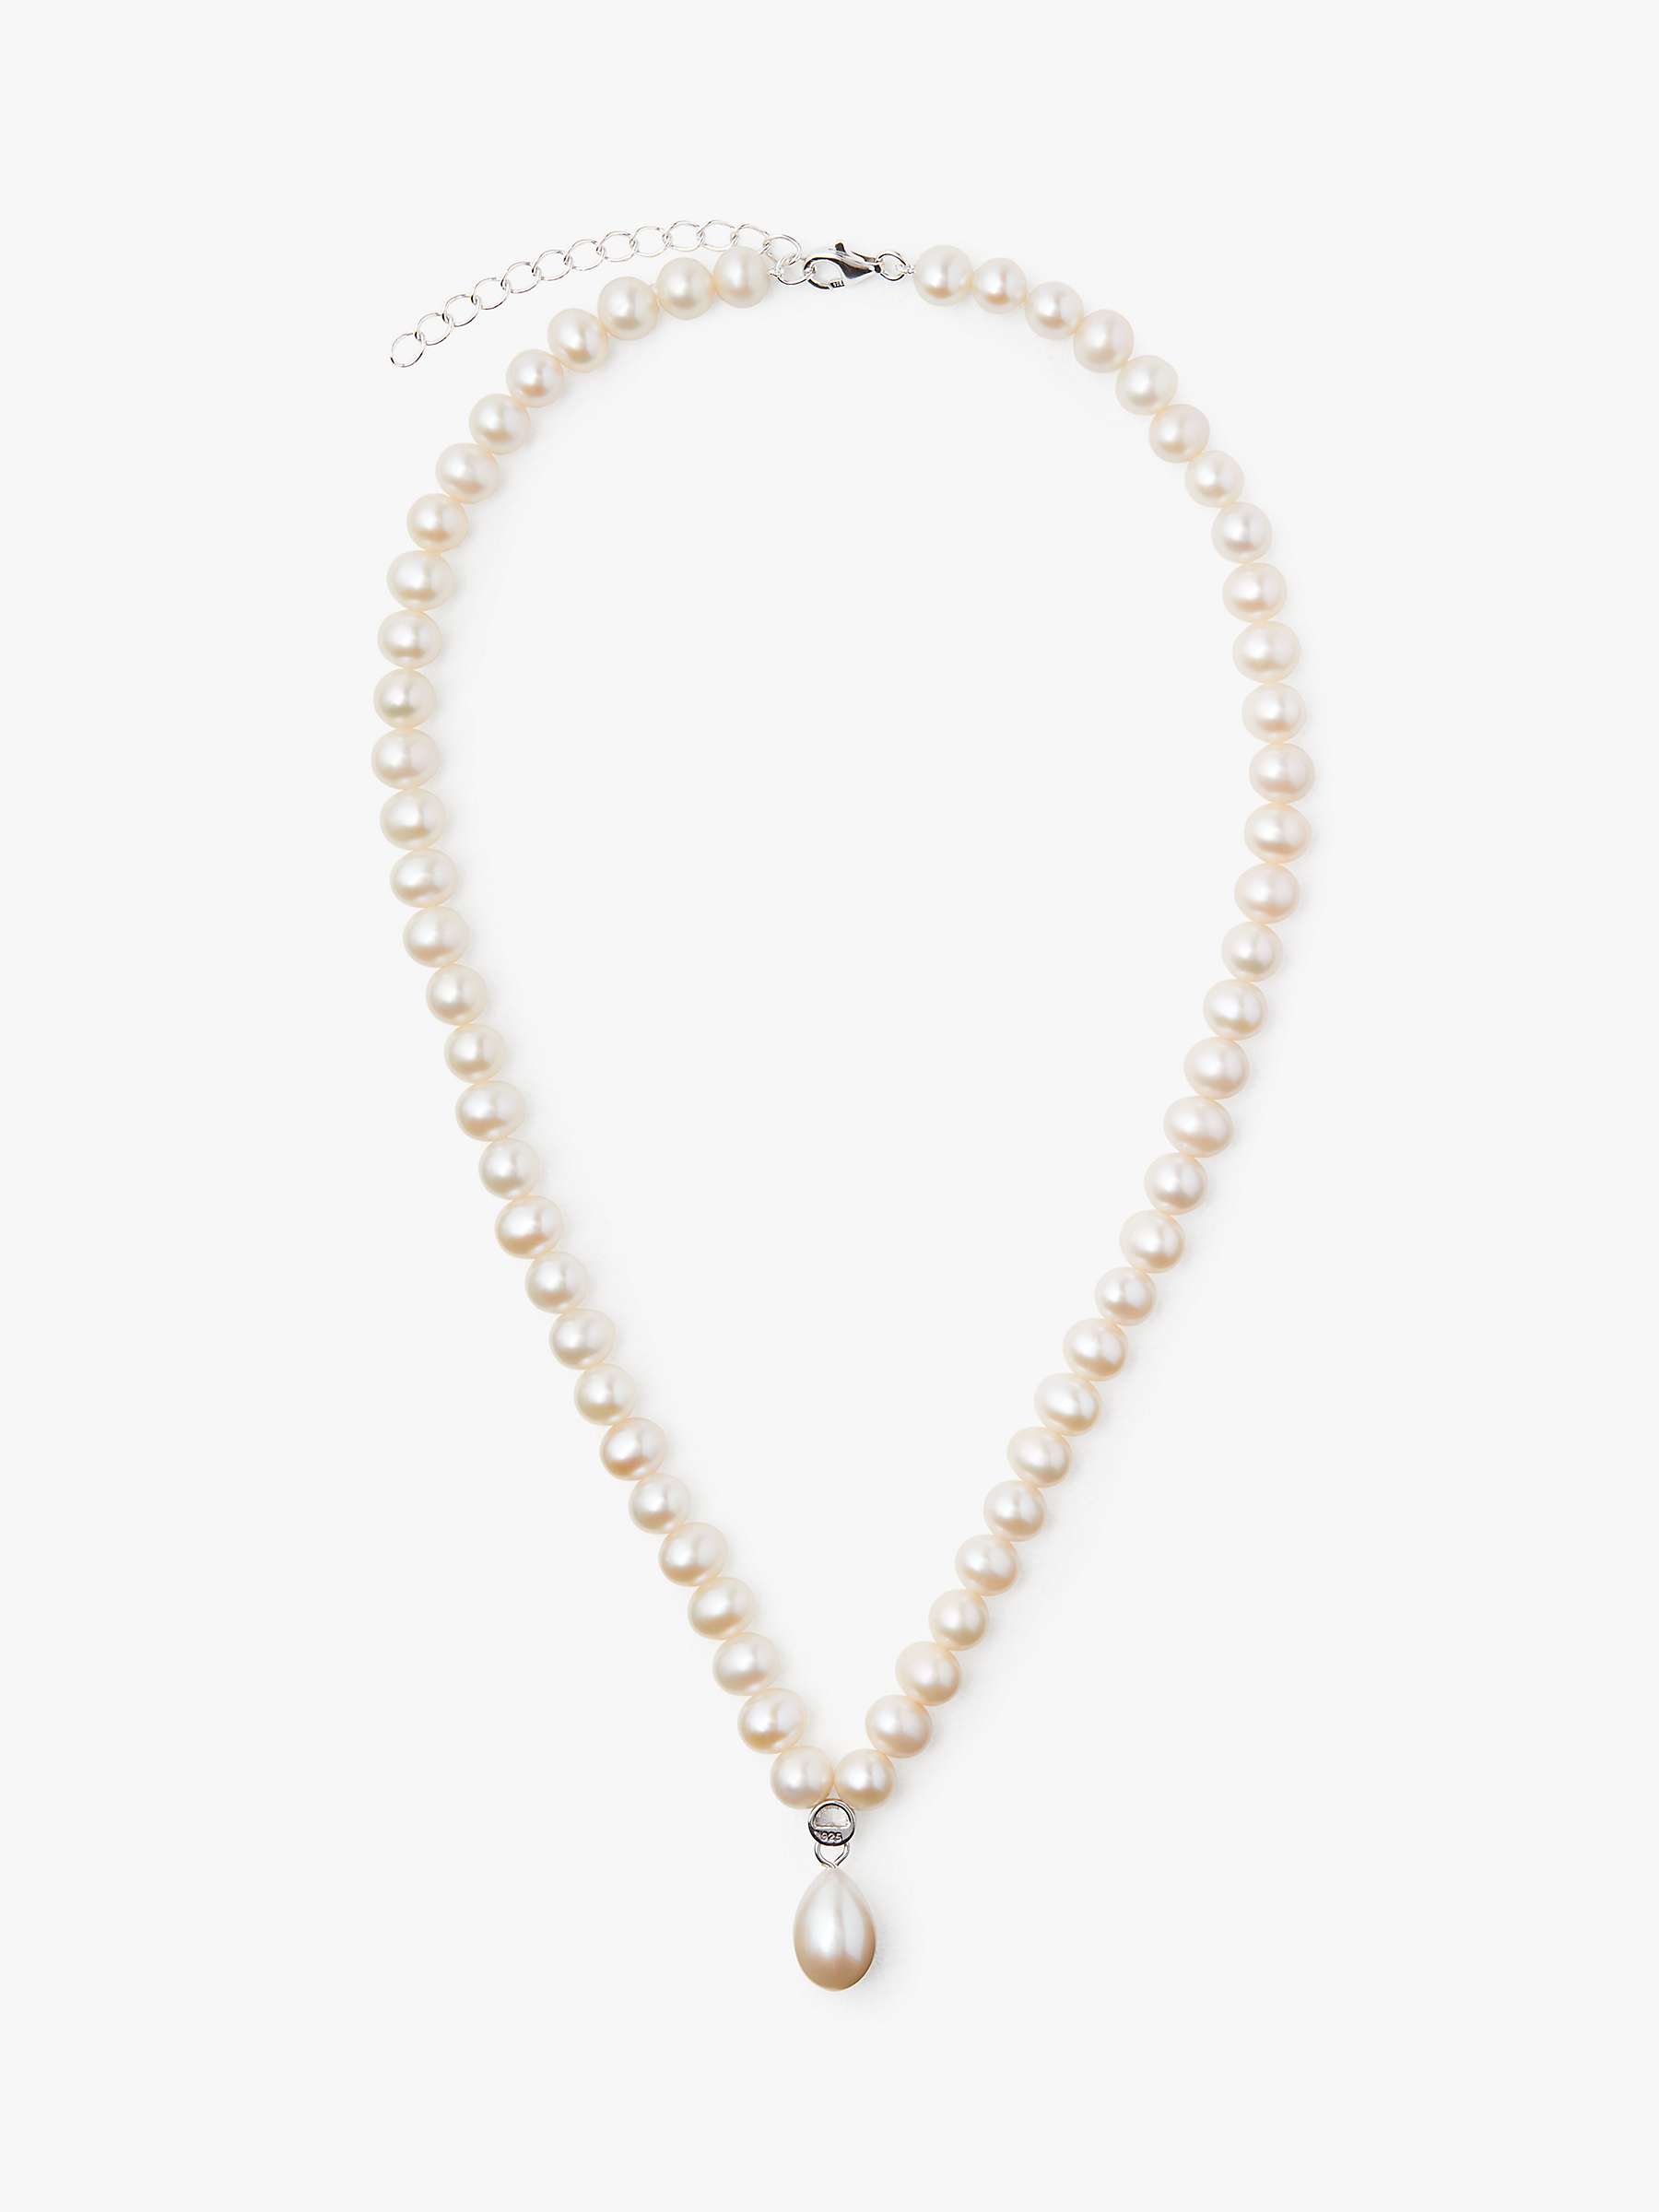 Buy Lido Sterling Silver Freshwater Pearls Cubic Zirconia Pendant Necklace, Cream Online at johnlewis.com